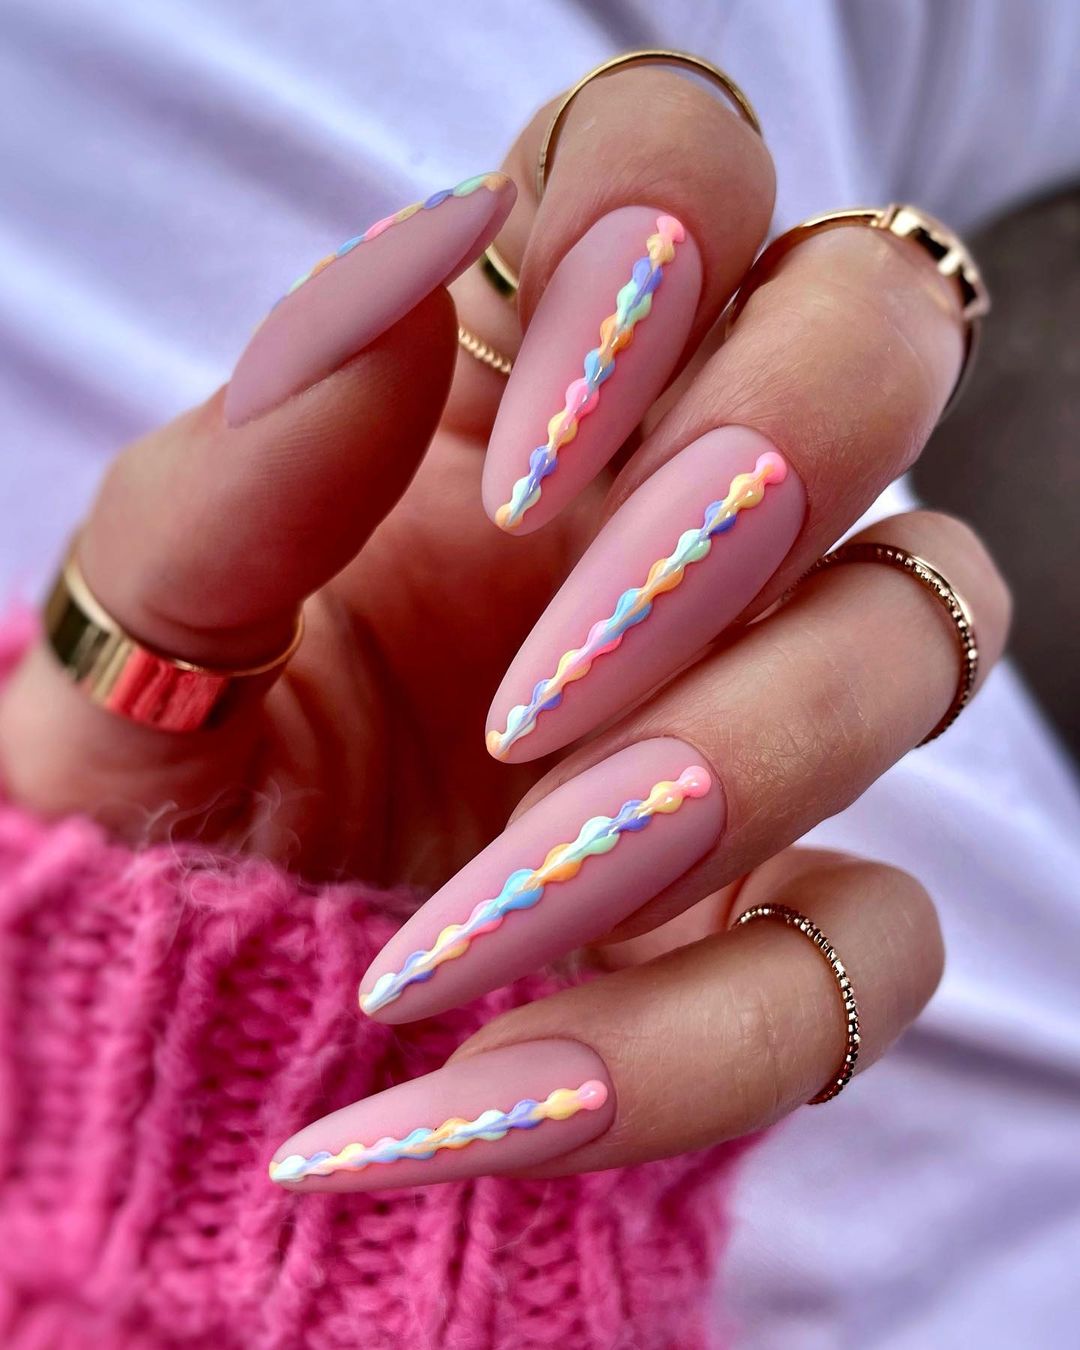 long Nude Almond Nails with Colourful Spots